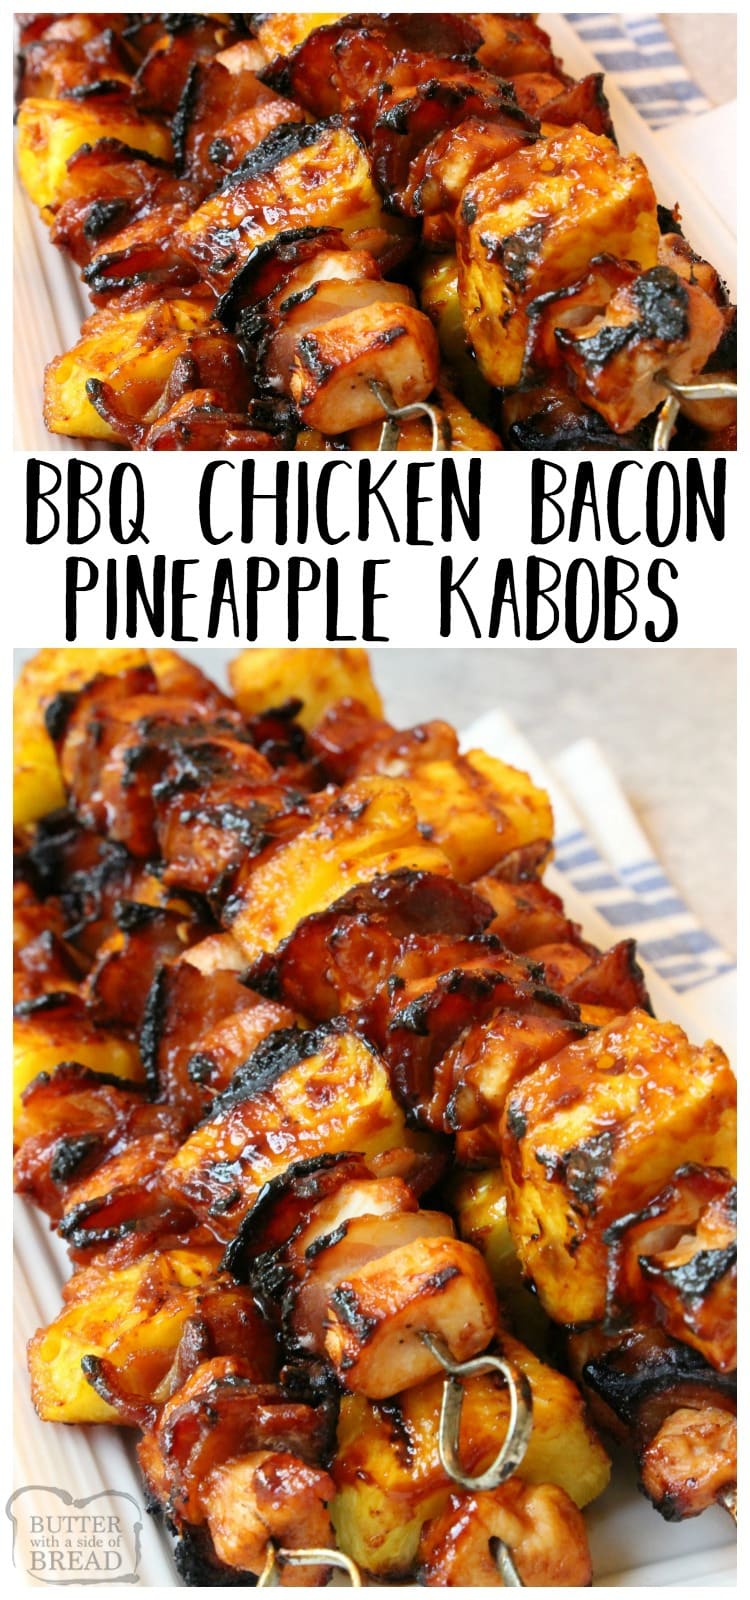 BBQ Chicken Kabobs with Bacon and Pineapple recipe with tender chicken grilled with pineapple and bacon then slathered with your favorite BBQ sauce. These are the ultimate BBQ chicken kabobs and are perfect for your next cookout! Easy and SUPER TASTY BBQ Chicken Kabob recipe from Butter With A Side of Bread